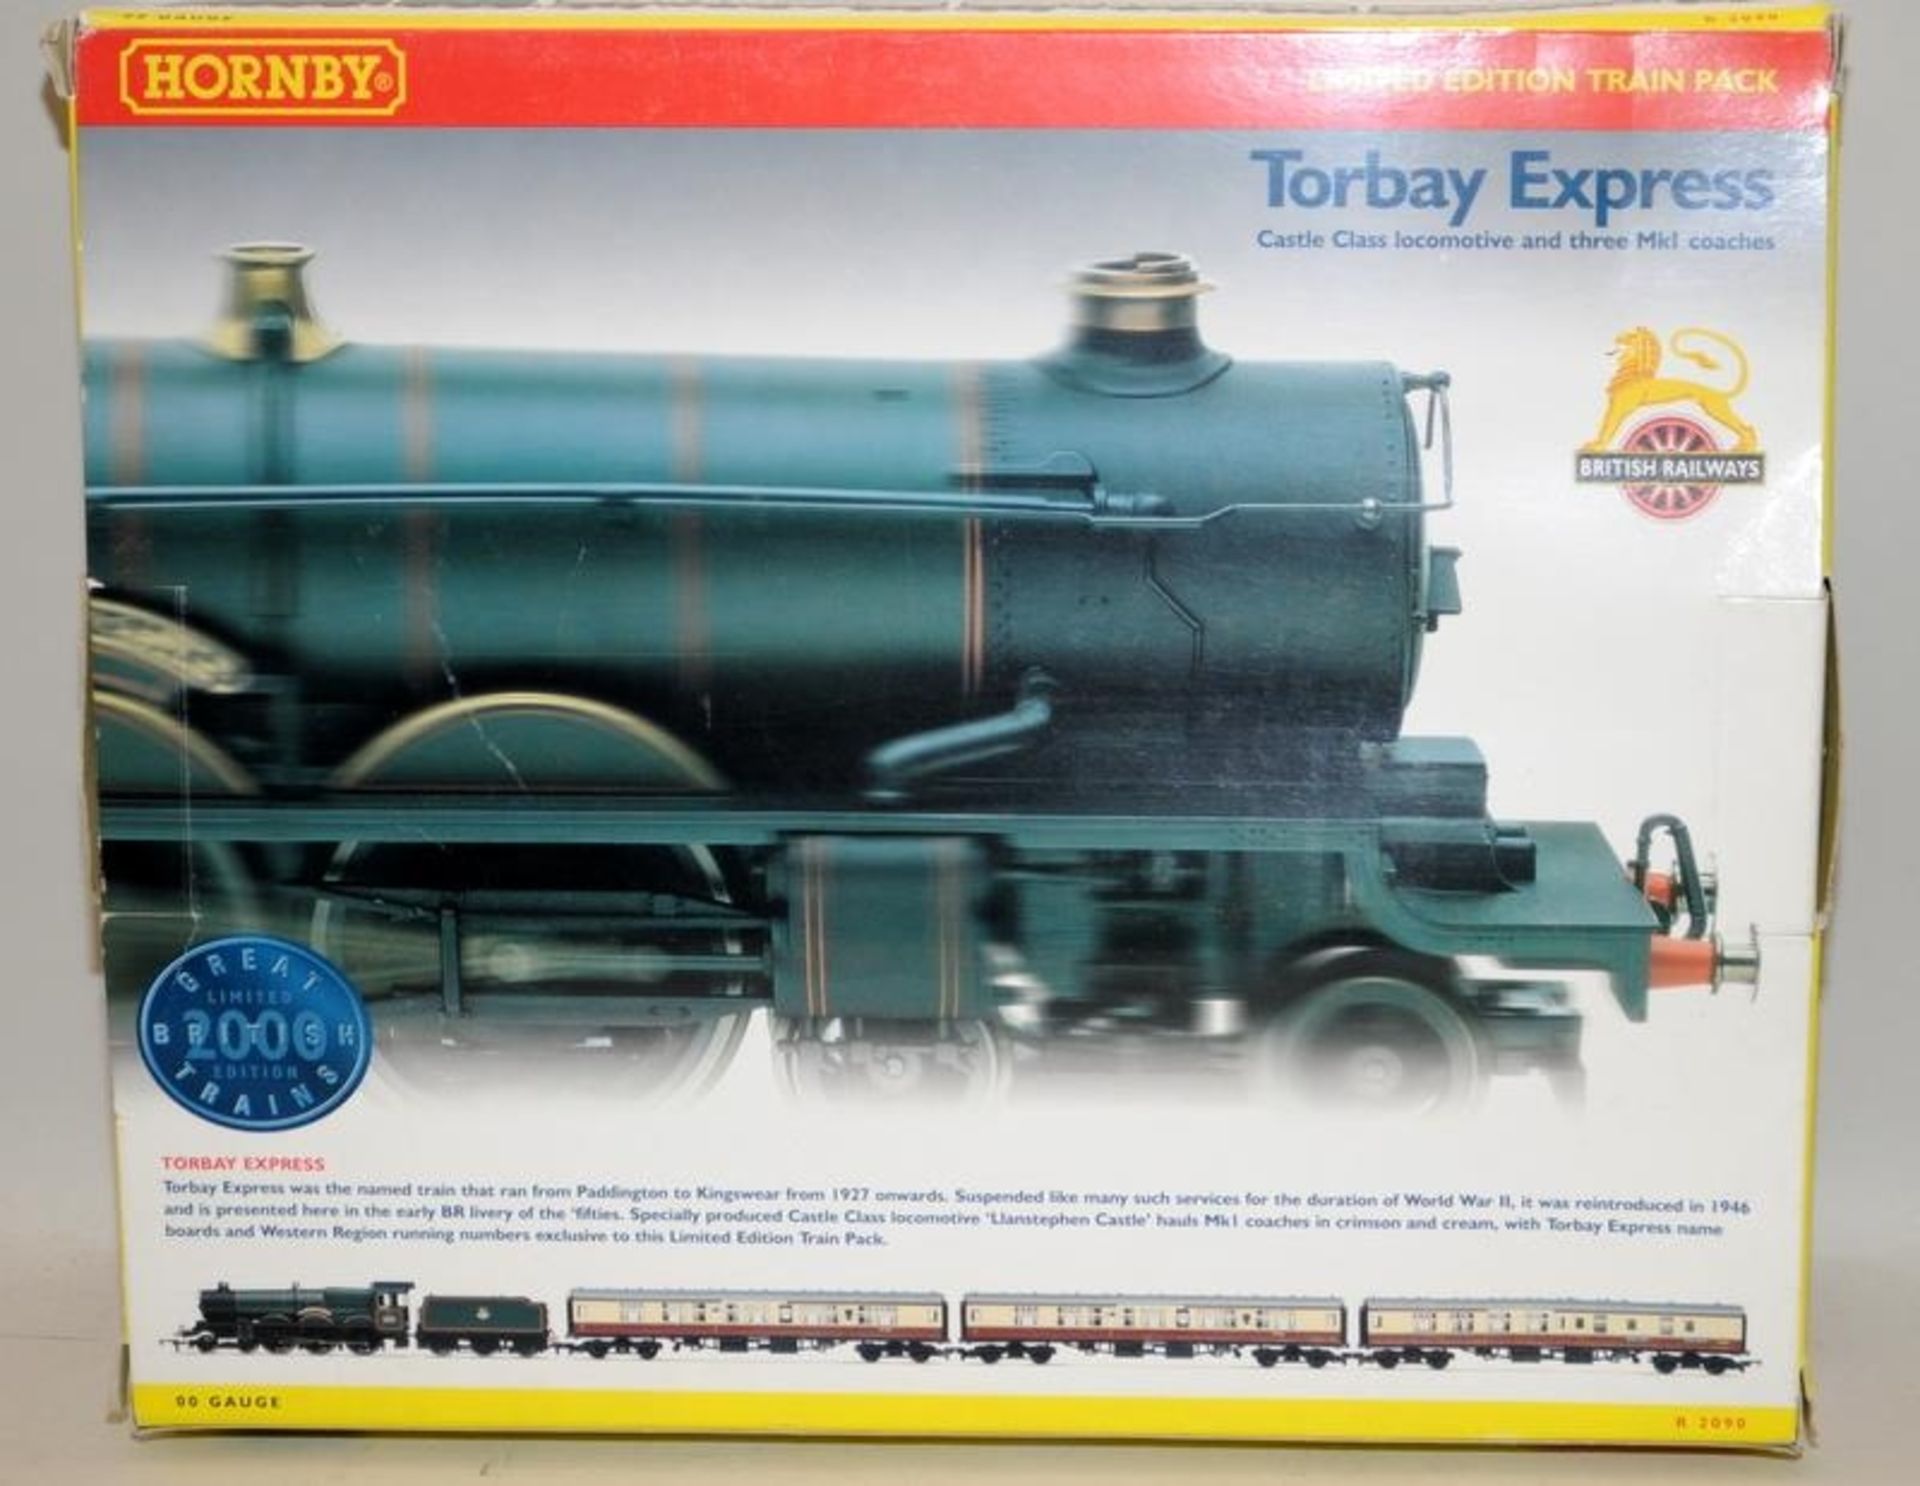 OO Gauge Hornby Limited Edition Train Pack Torbay Express, Locomotive and three coaches ref:R2090.